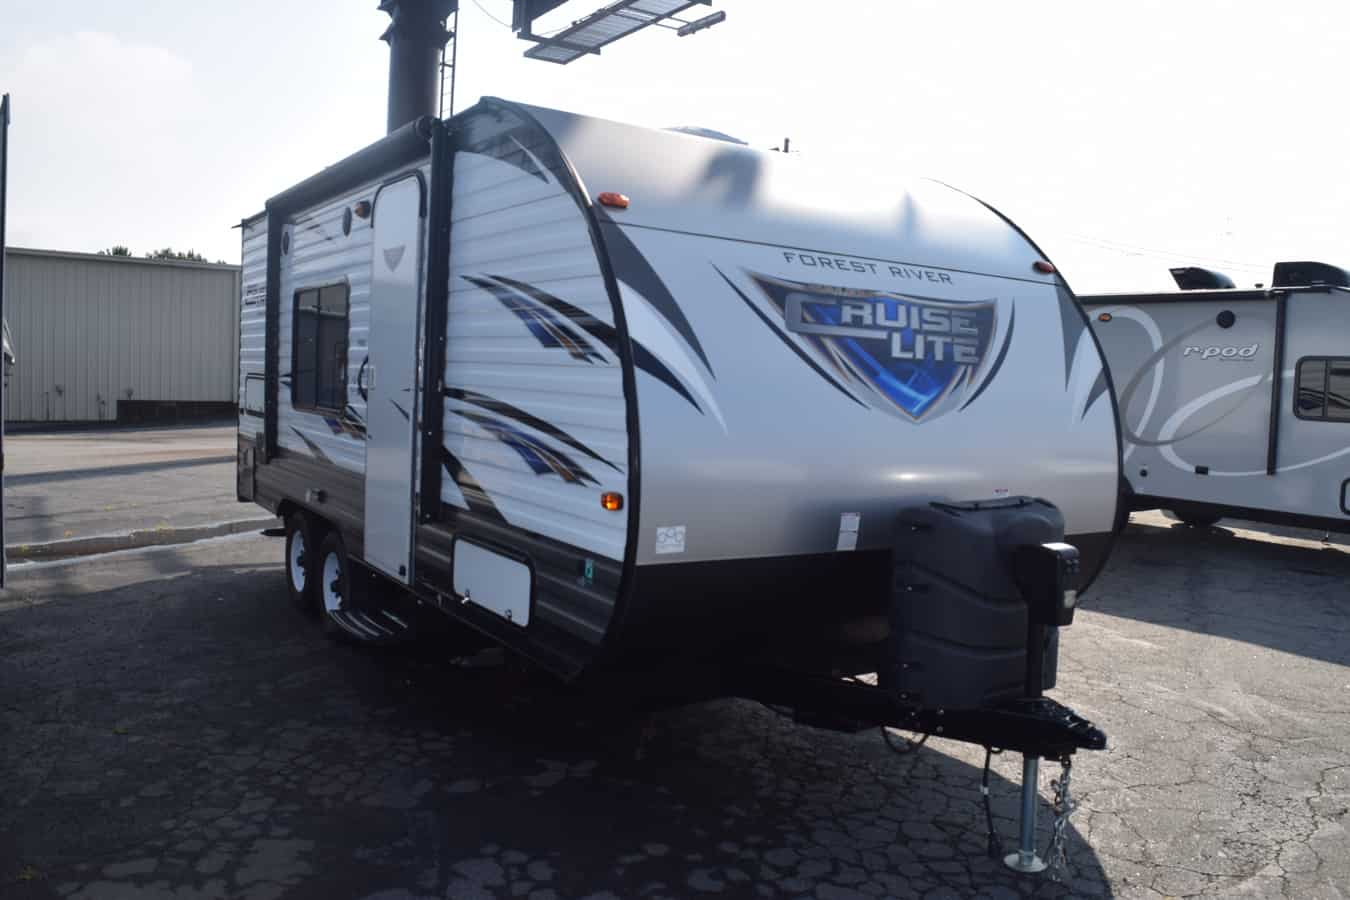 USED 2017 Forest River SALEM CRUISE LITE 171RBXL